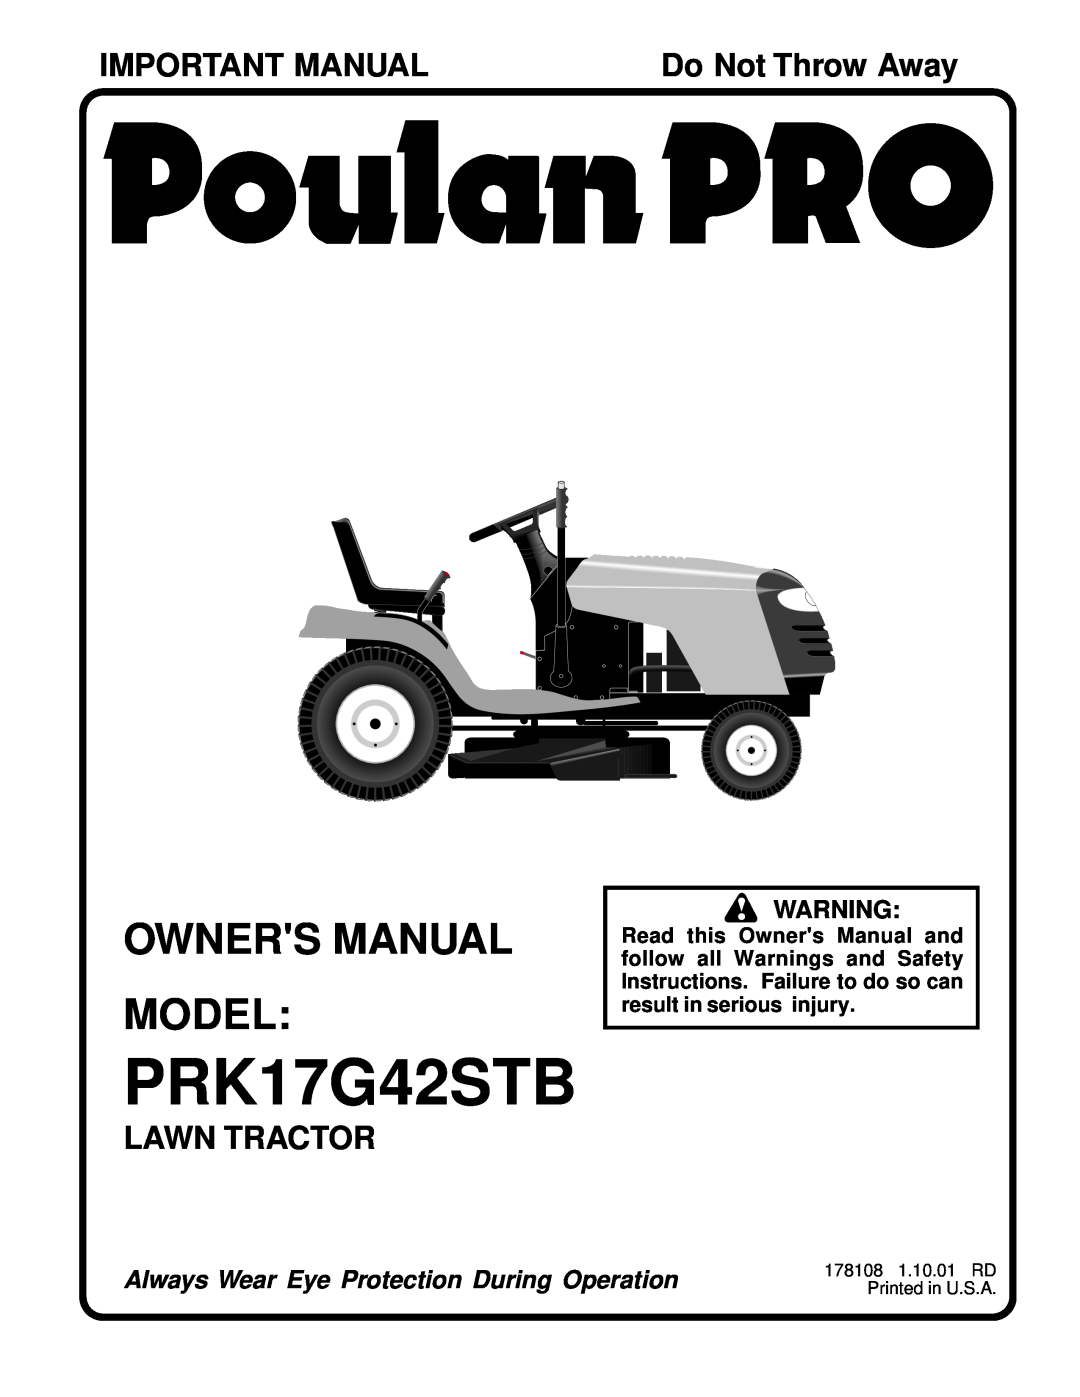 Poulan 178108 owner manual Owners Manual Model, Important Manual, Lawn Tractor, PRK17G42STB, Do Not Throw Away 